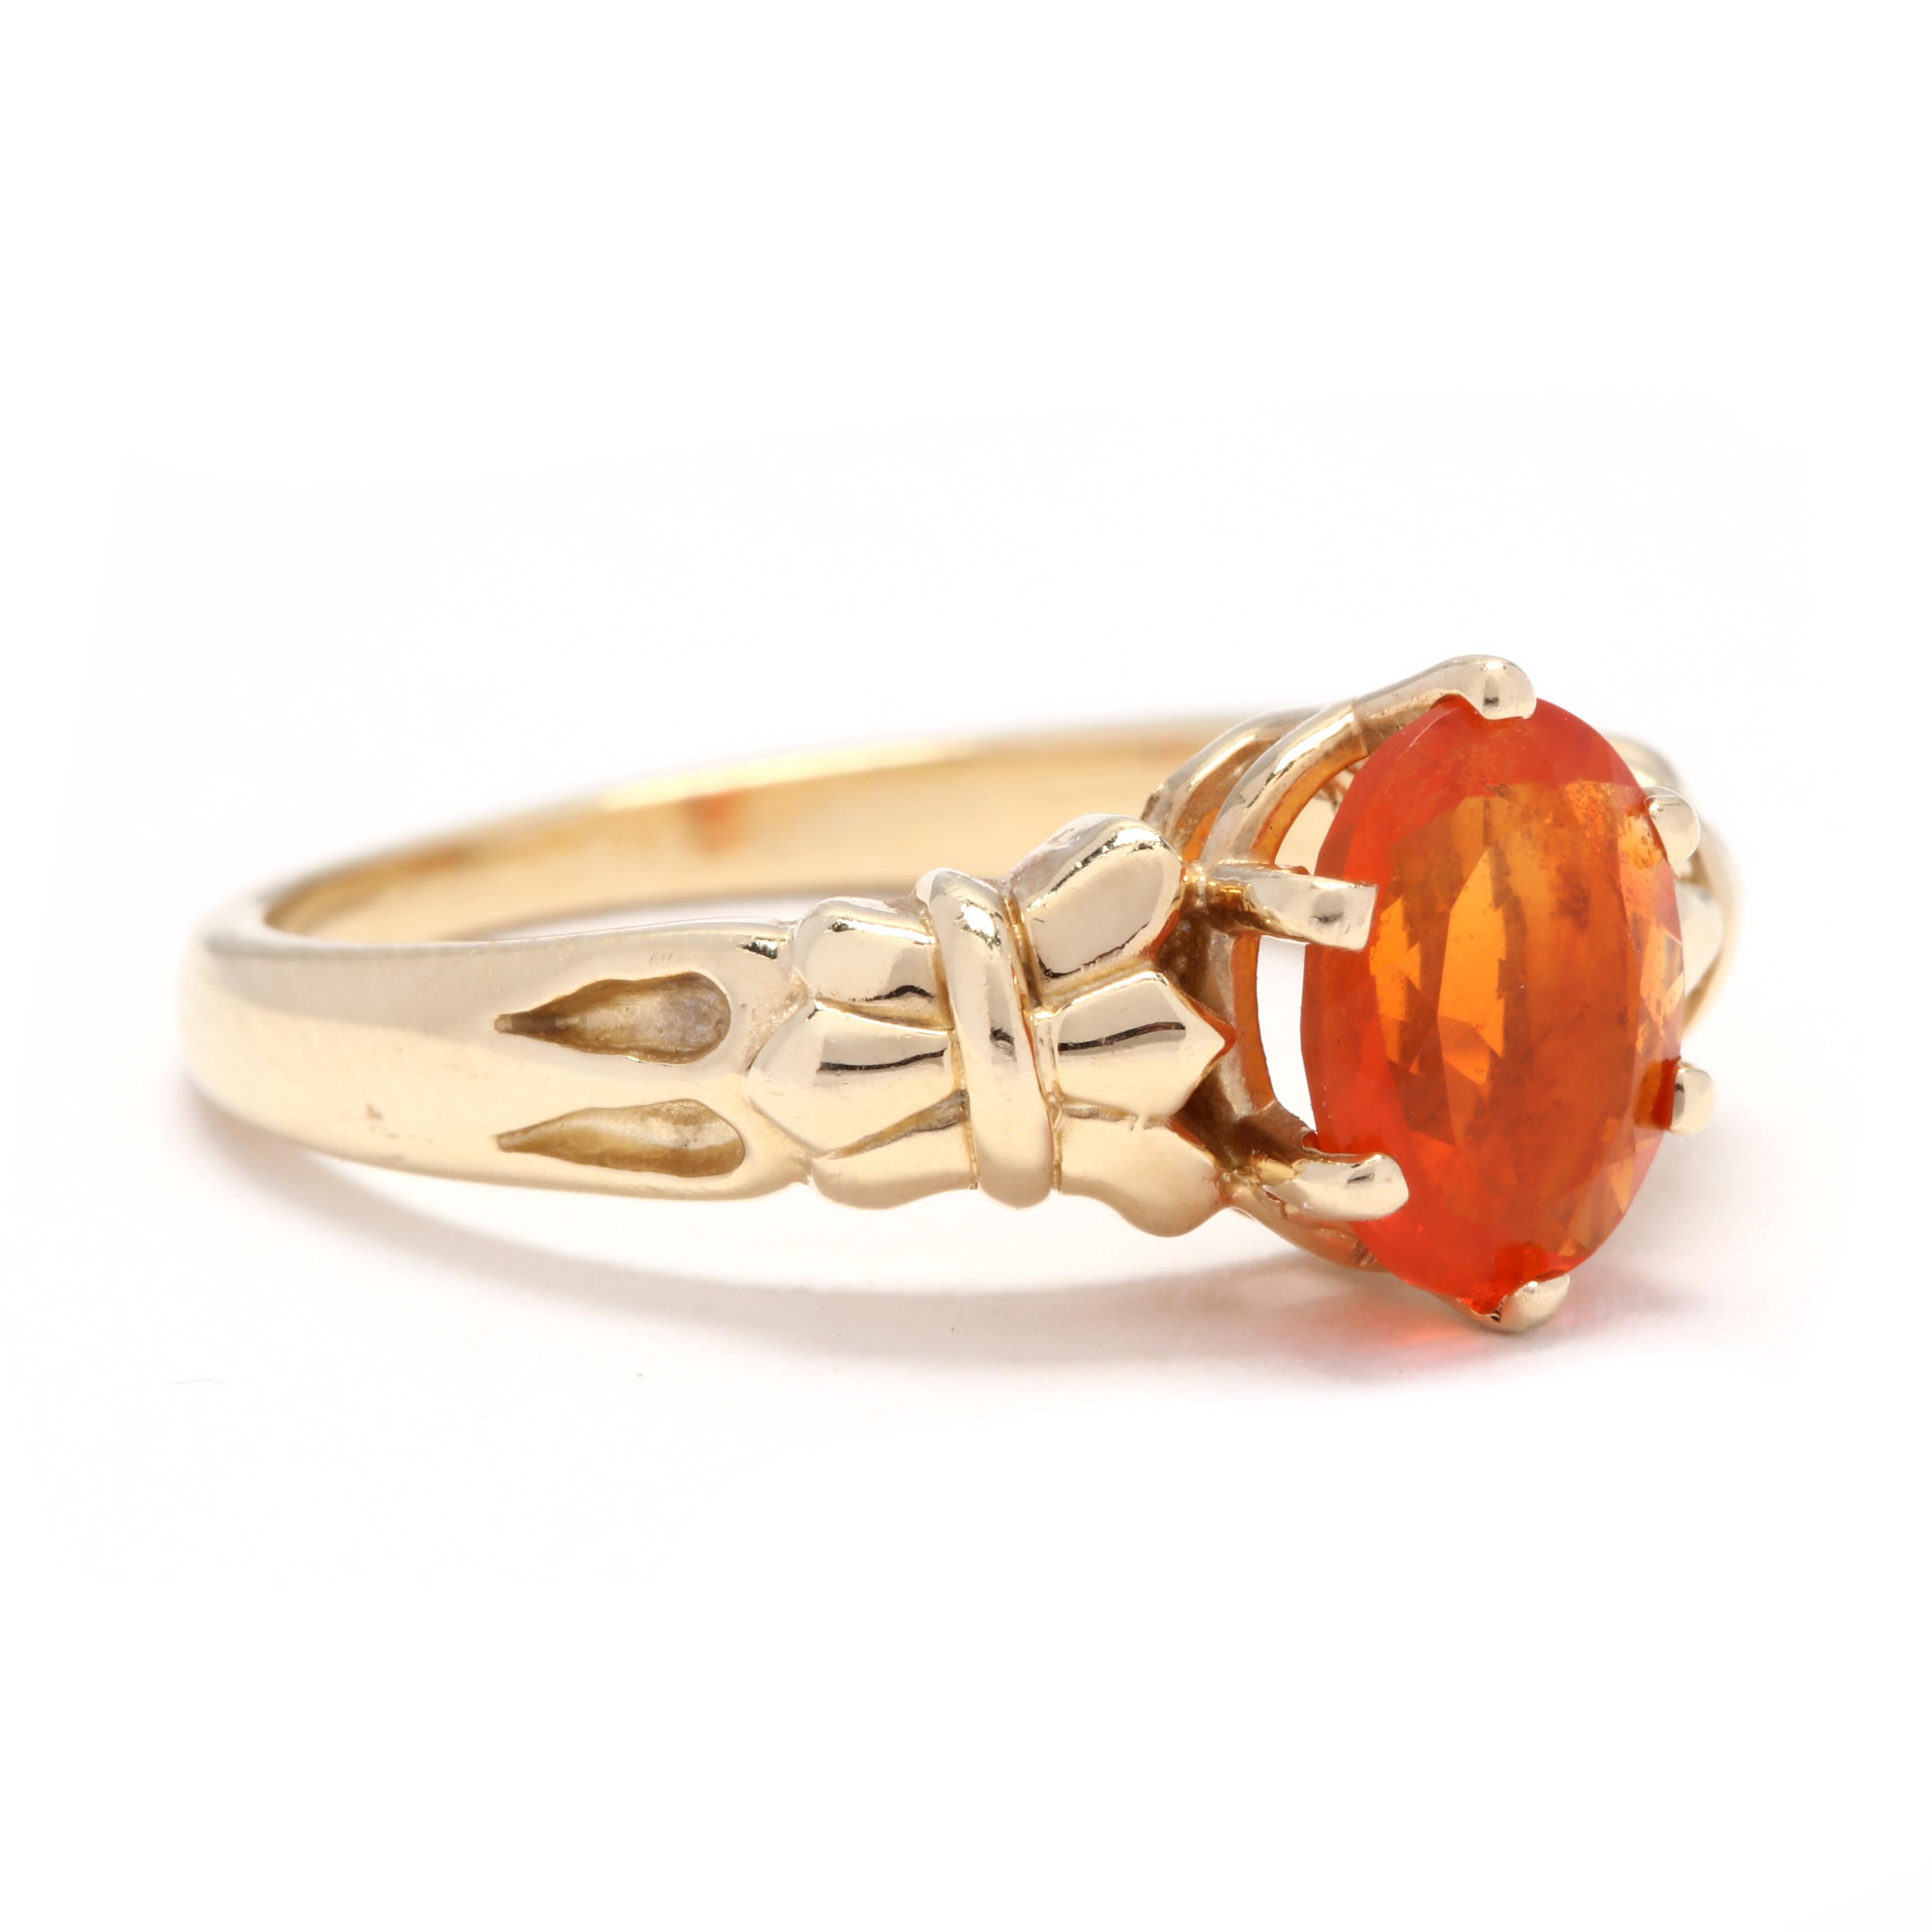 A 14 karat yellow gold and fire opal solitaire ring. This ring features a prong set, faceted oval fire opal center stone weighing approximately .80 carat with a pinched foliate design shank.

Stone:
- fire opal
- oval cut, 1 stone
- 8 x 6.17 x 3.97